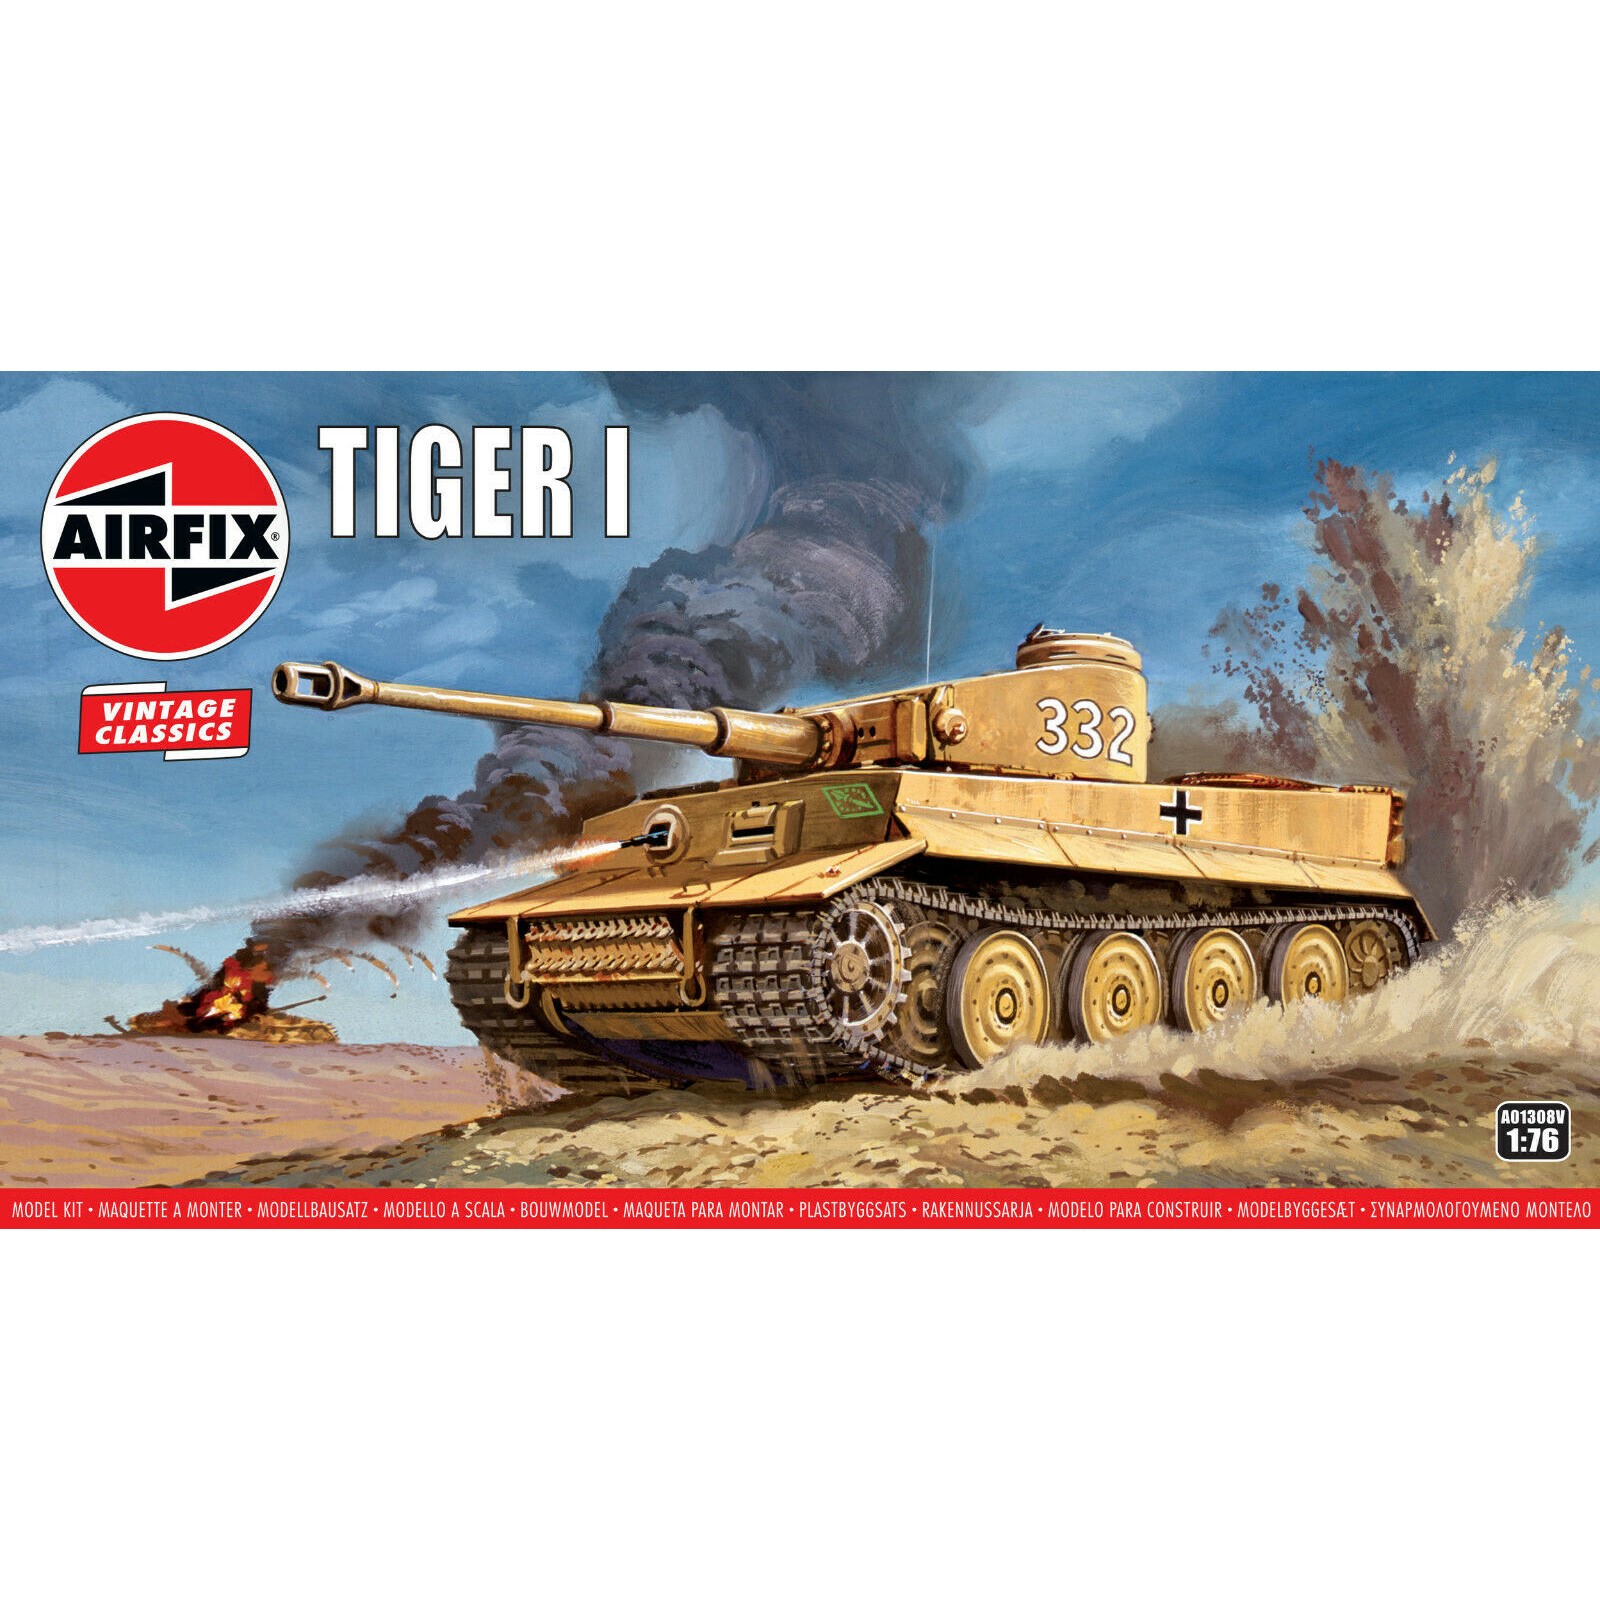 Tiger I Tank Airfix Model Kits Available From Quickdraw. Get Yours Today!